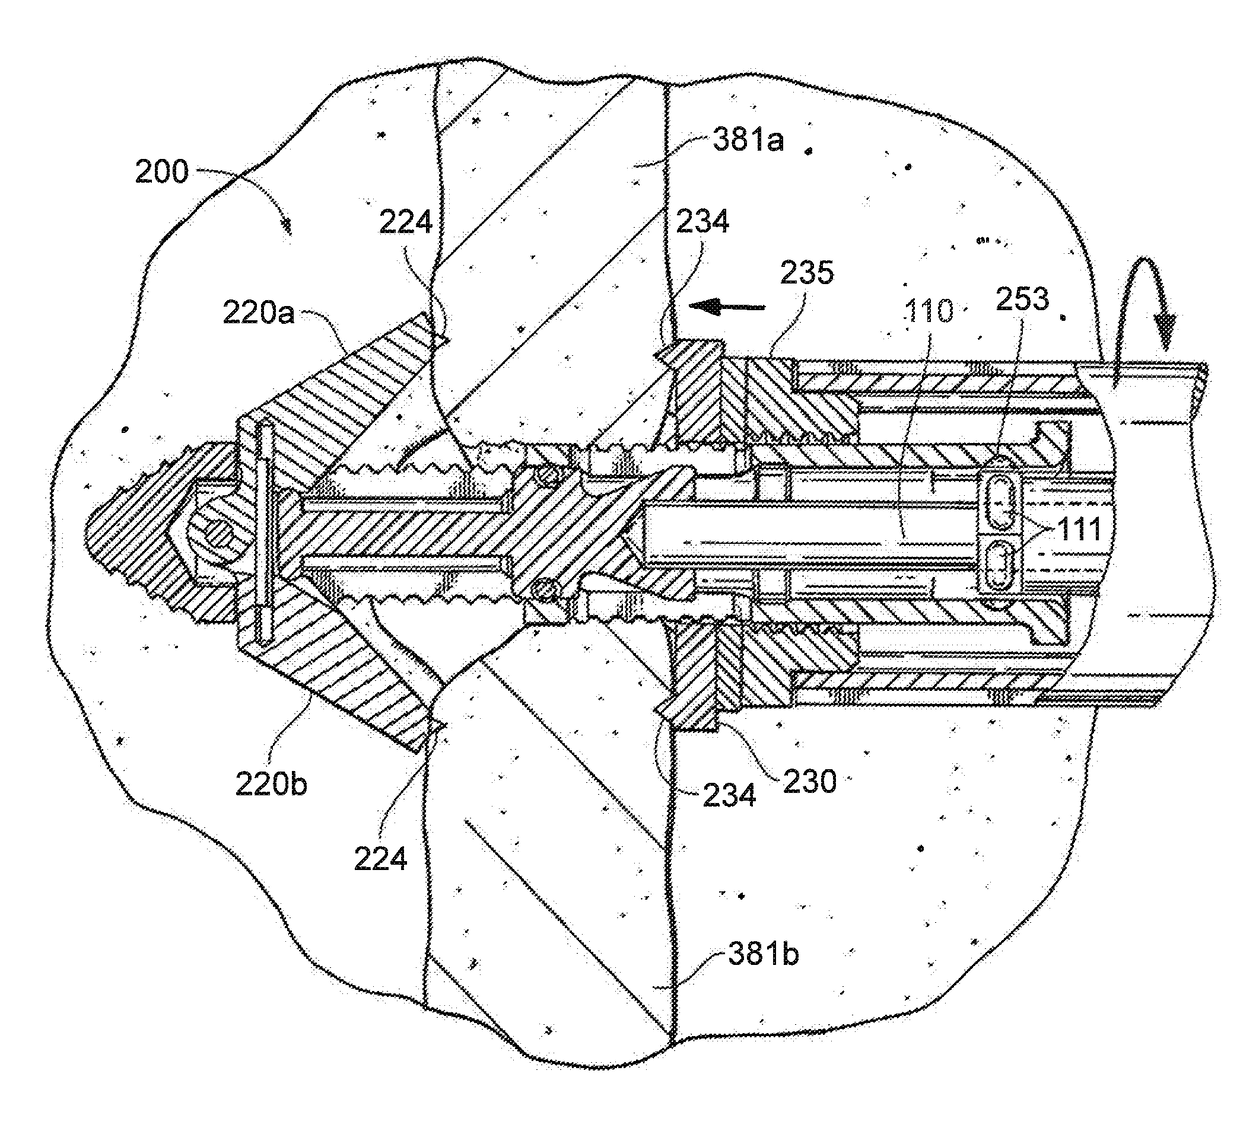 Interspinous implant insertion instrument with staggered path implant deployment mechanism